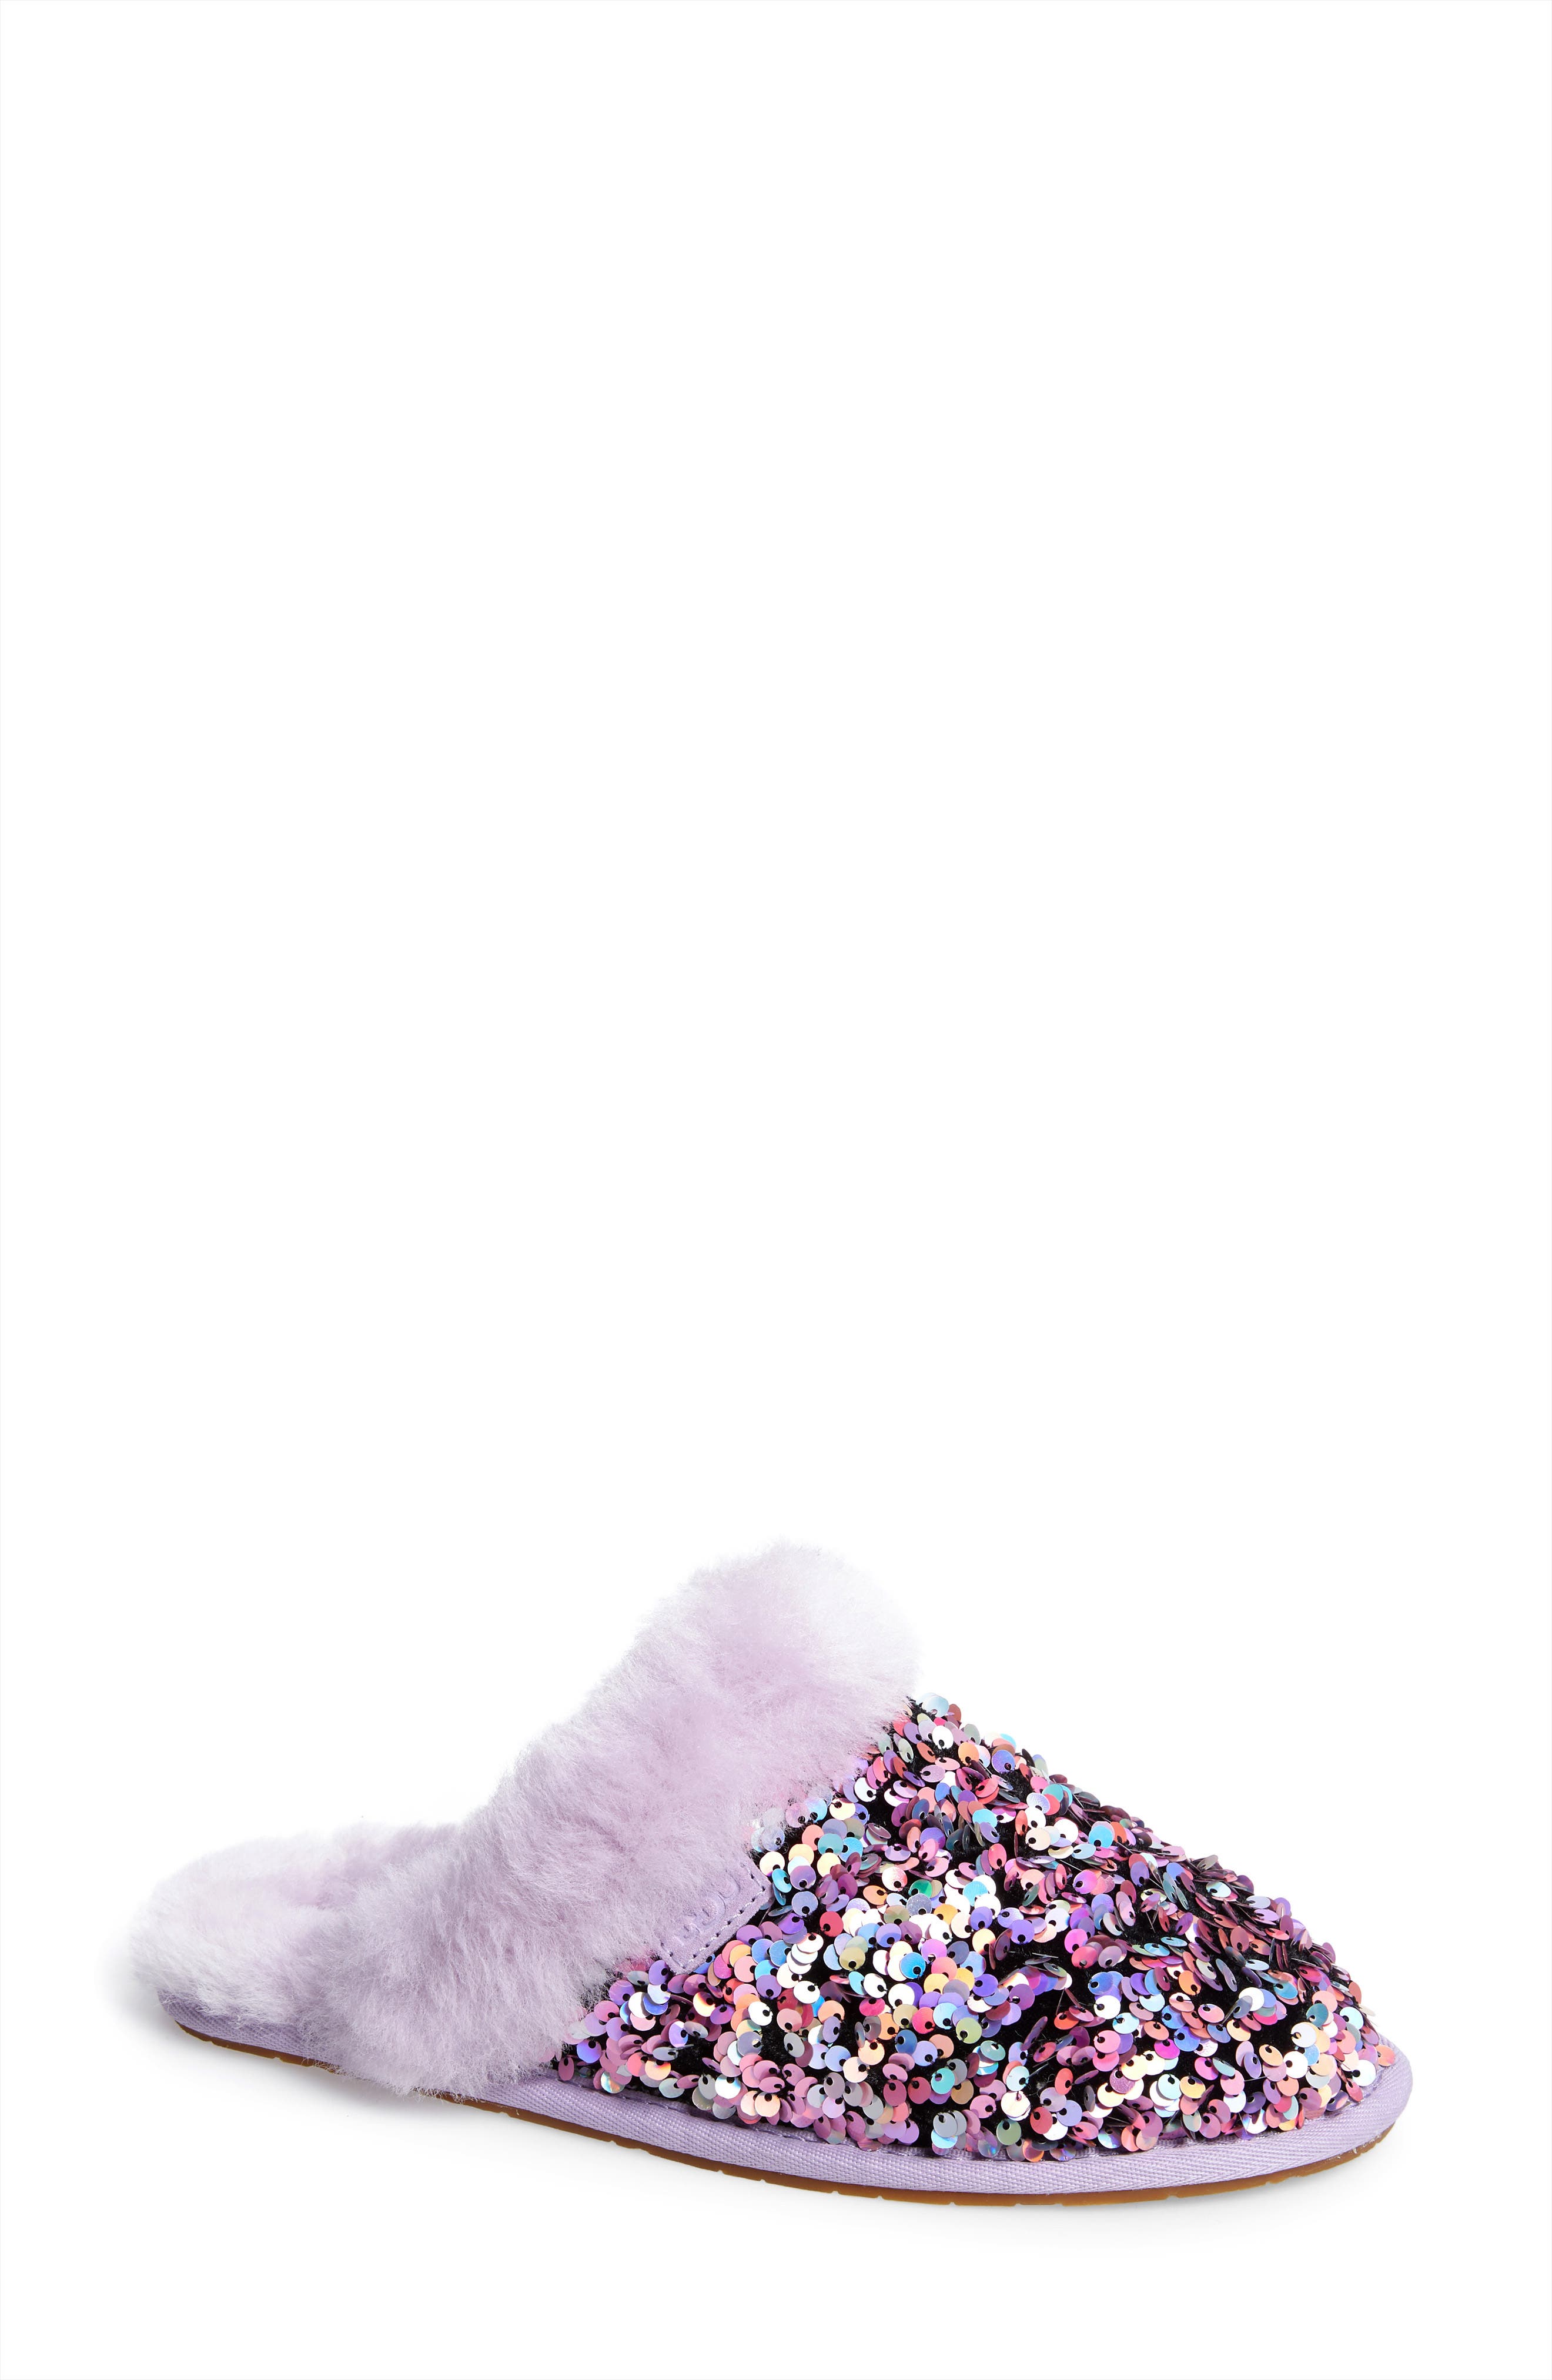 sparkly ugg slippers